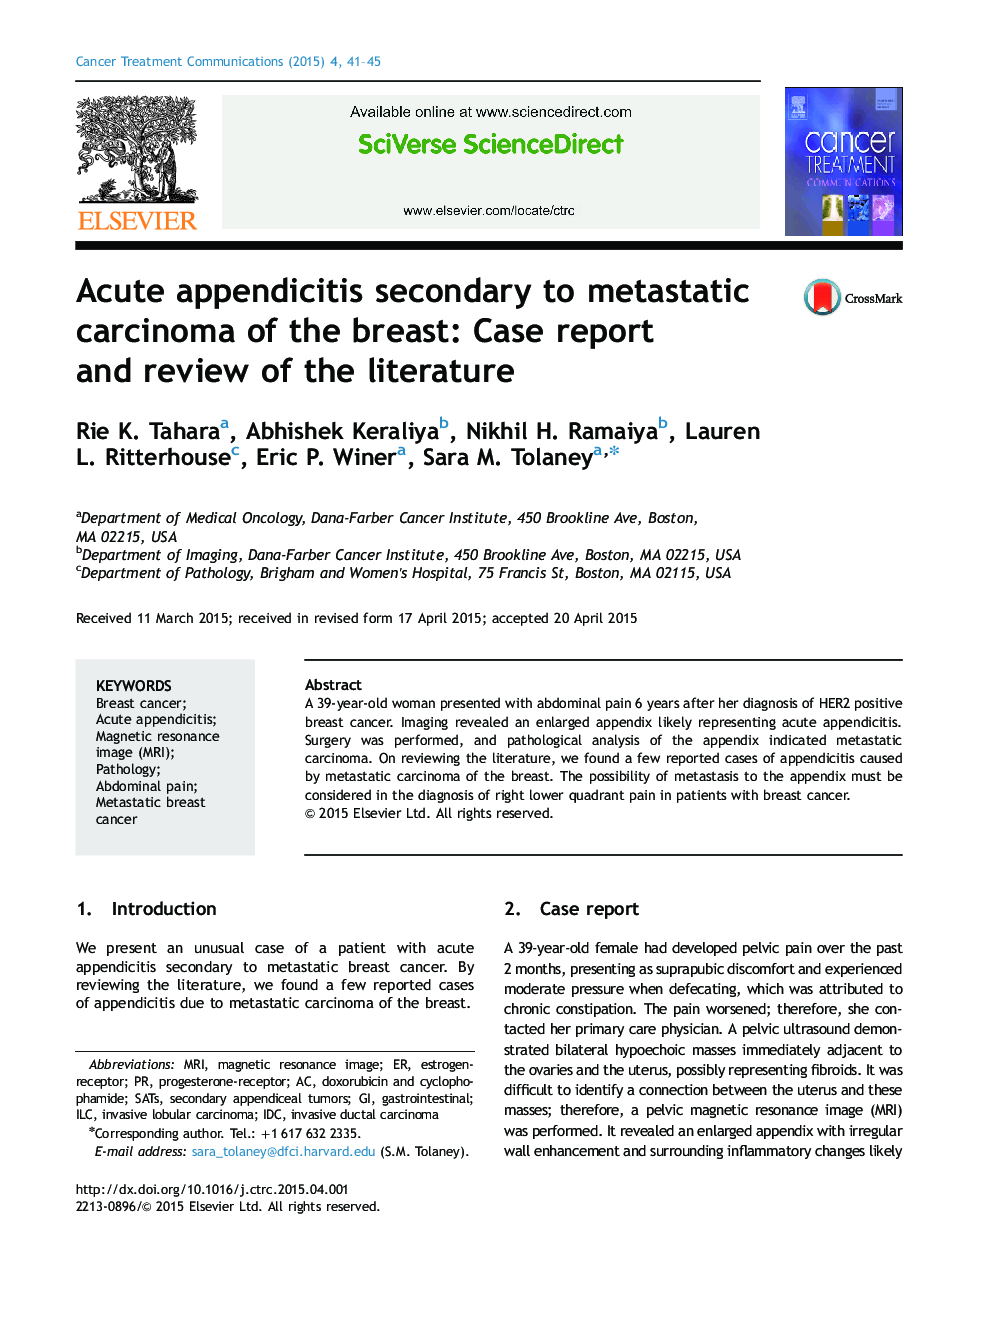 Acute appendicitis secondary to metastatic carcinoma of the breast: Case report and review of the literature